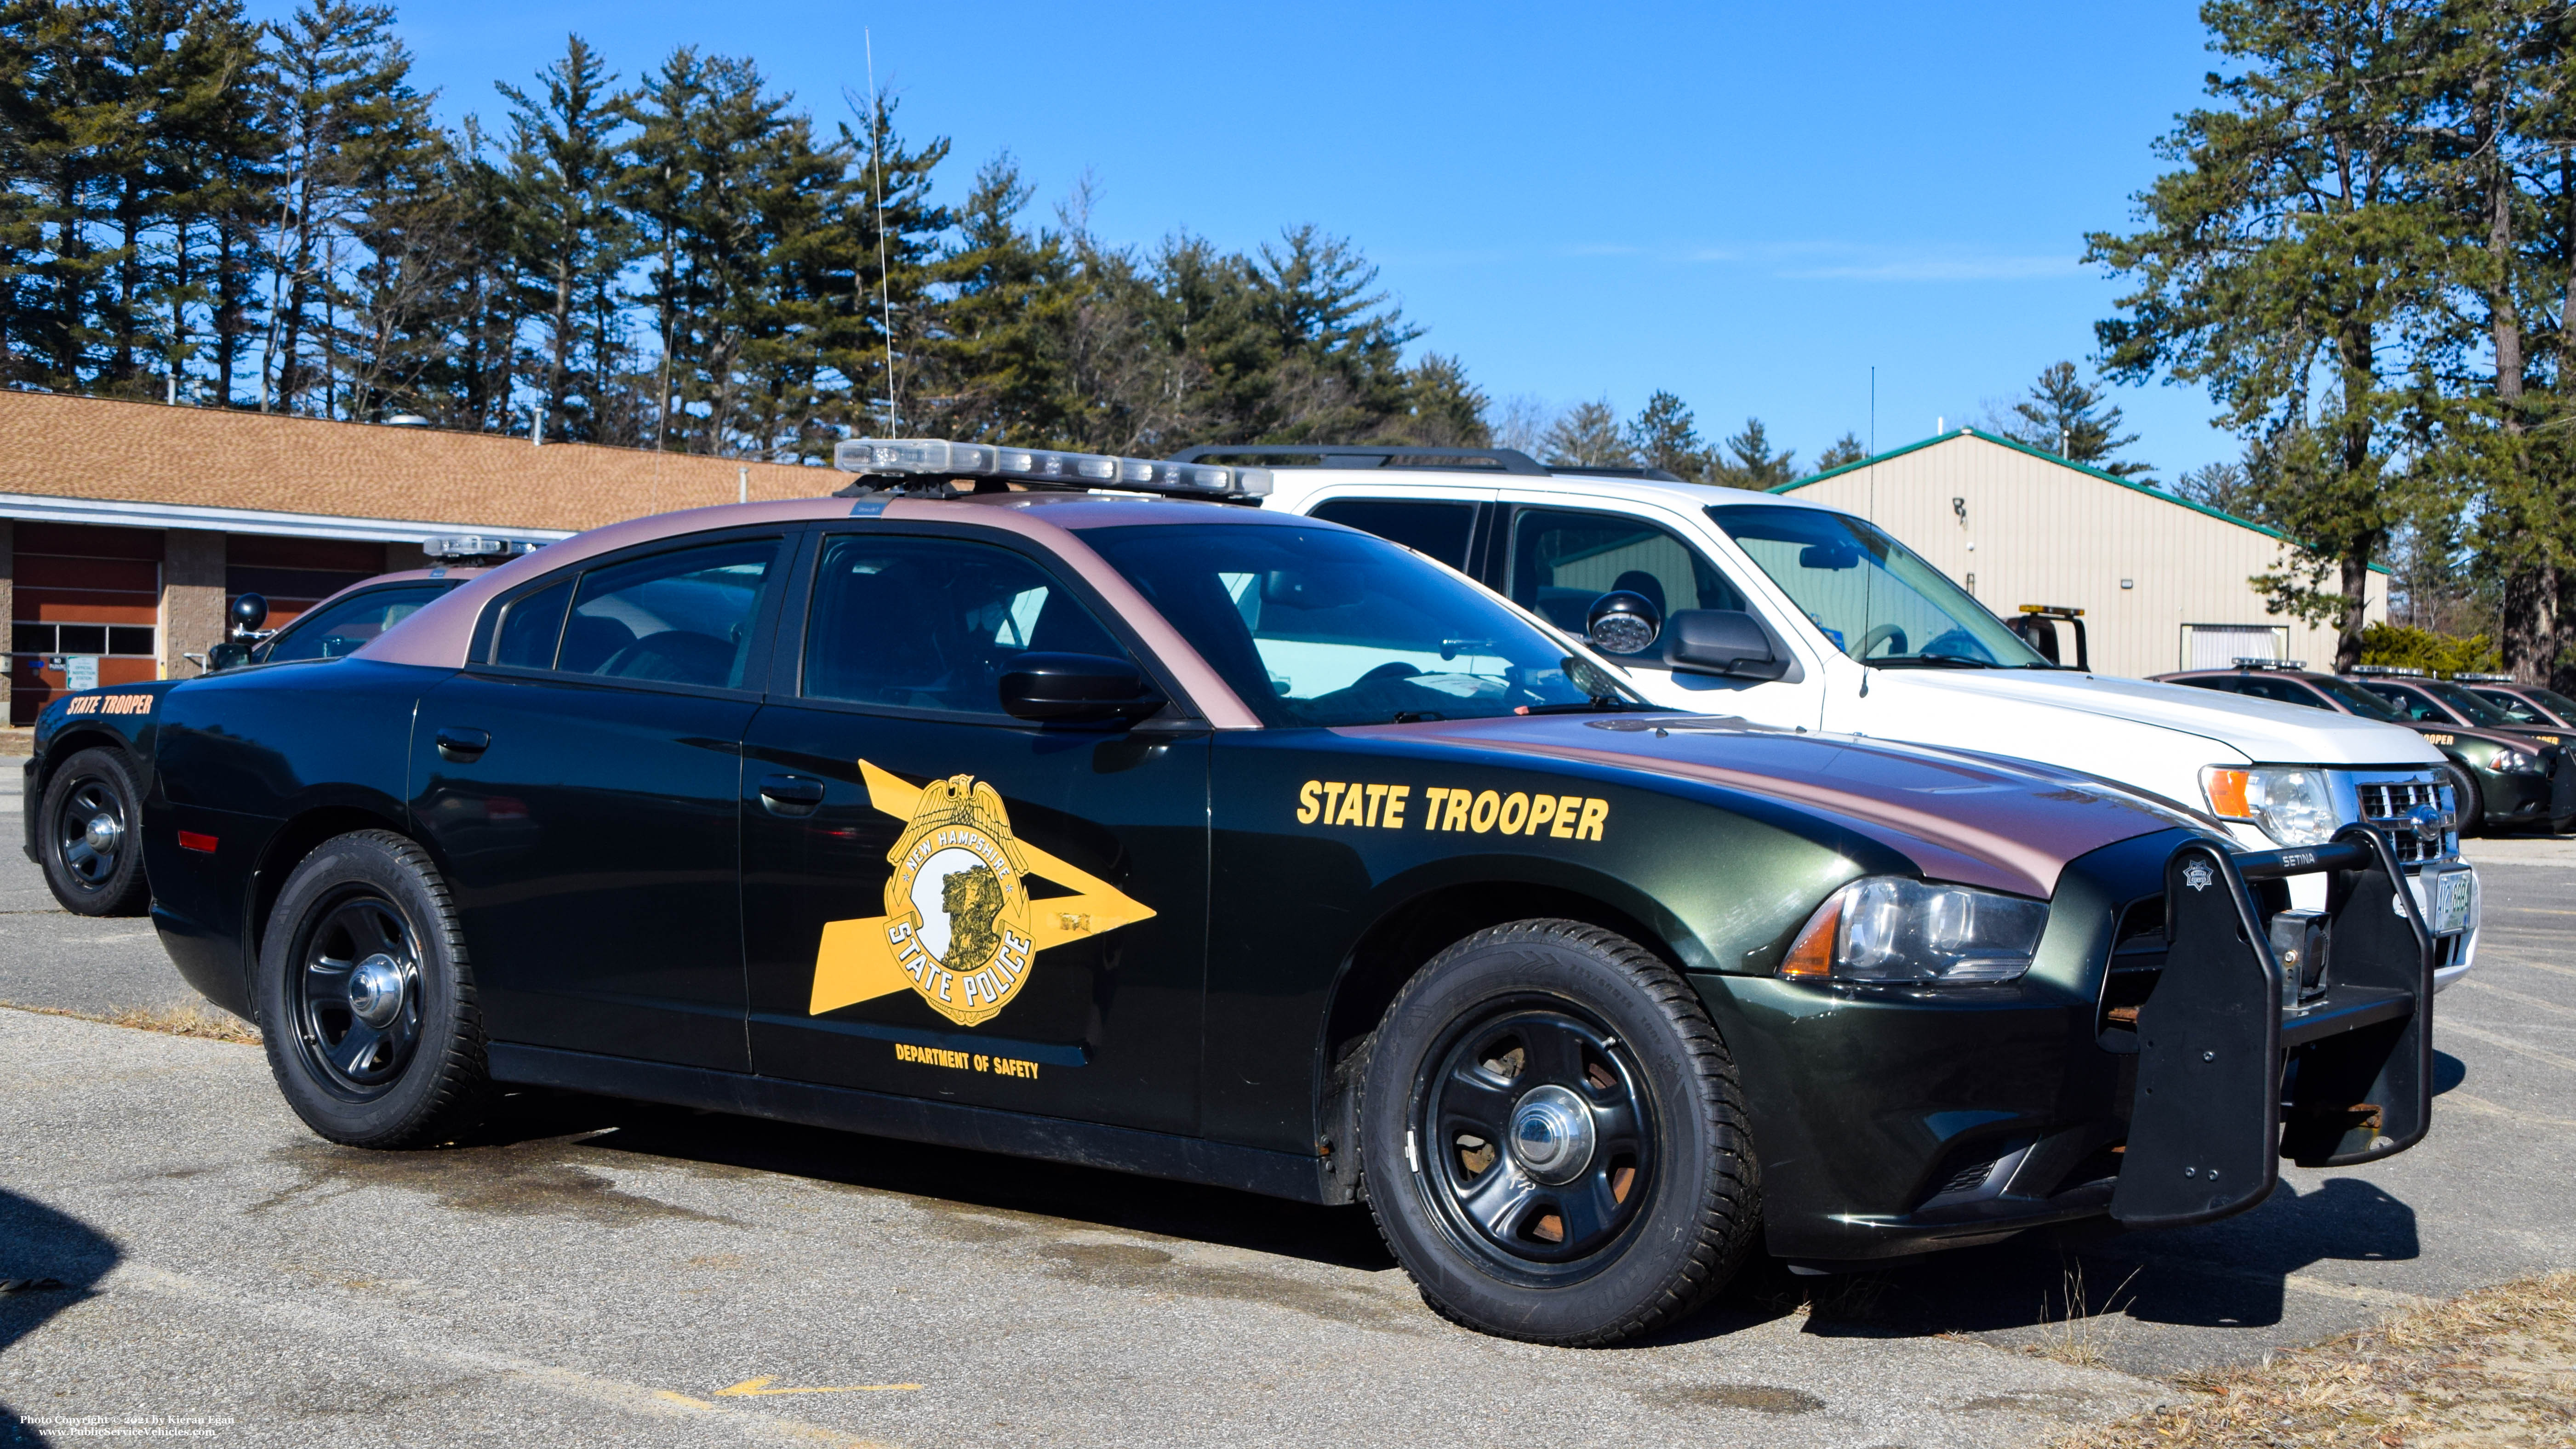 A photo  of New Hampshire State Police
            Cruiser 916, a 2011-2014 Dodge Charger             taken by Kieran Egan